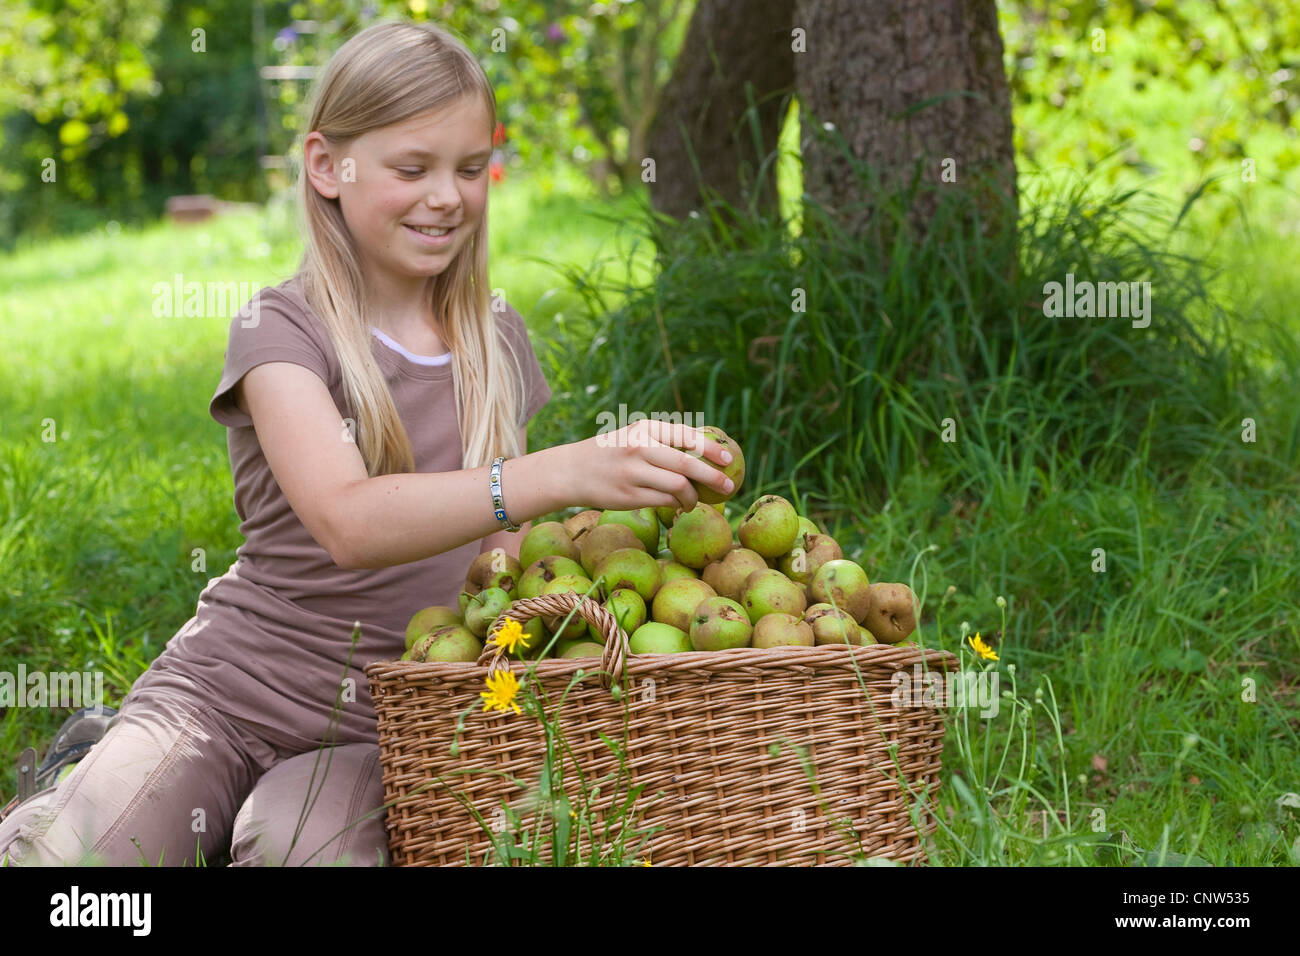 apple tree (Malus domestica), girl sitting under an apple tree with a big basket full of apples Stock Photo